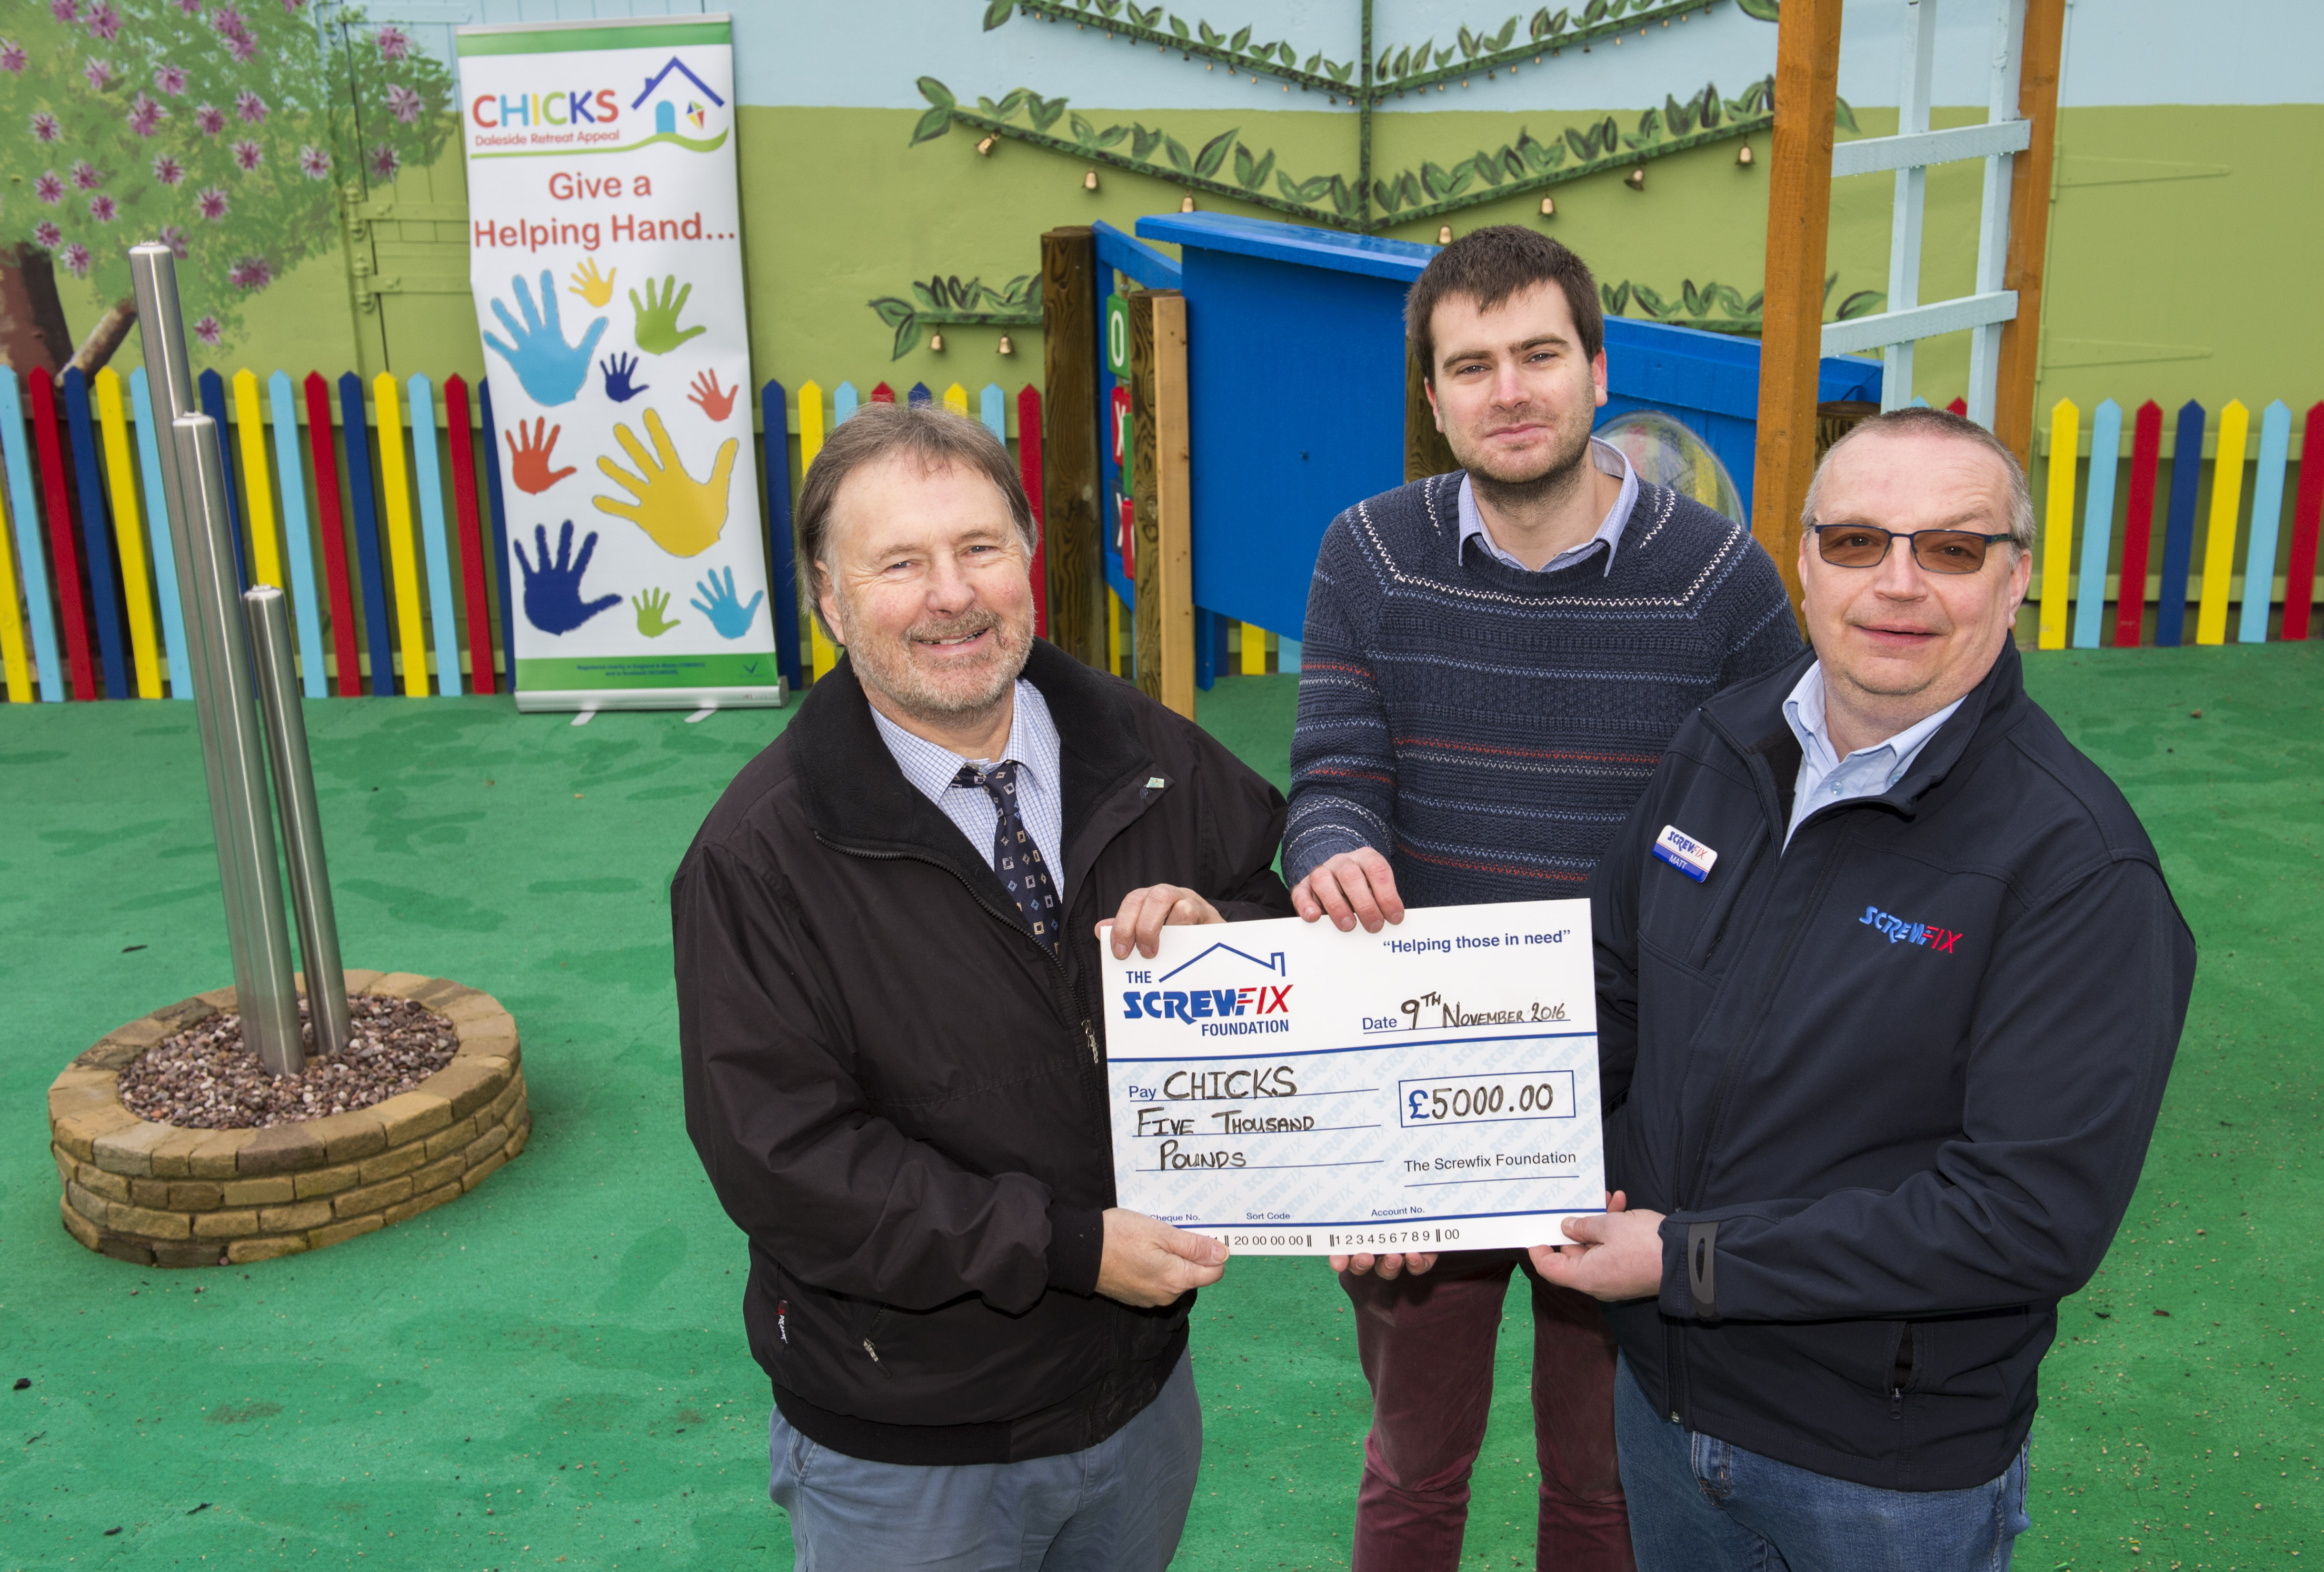 Ashbourne based charity gets a helping hand from The Screwfix Foundation